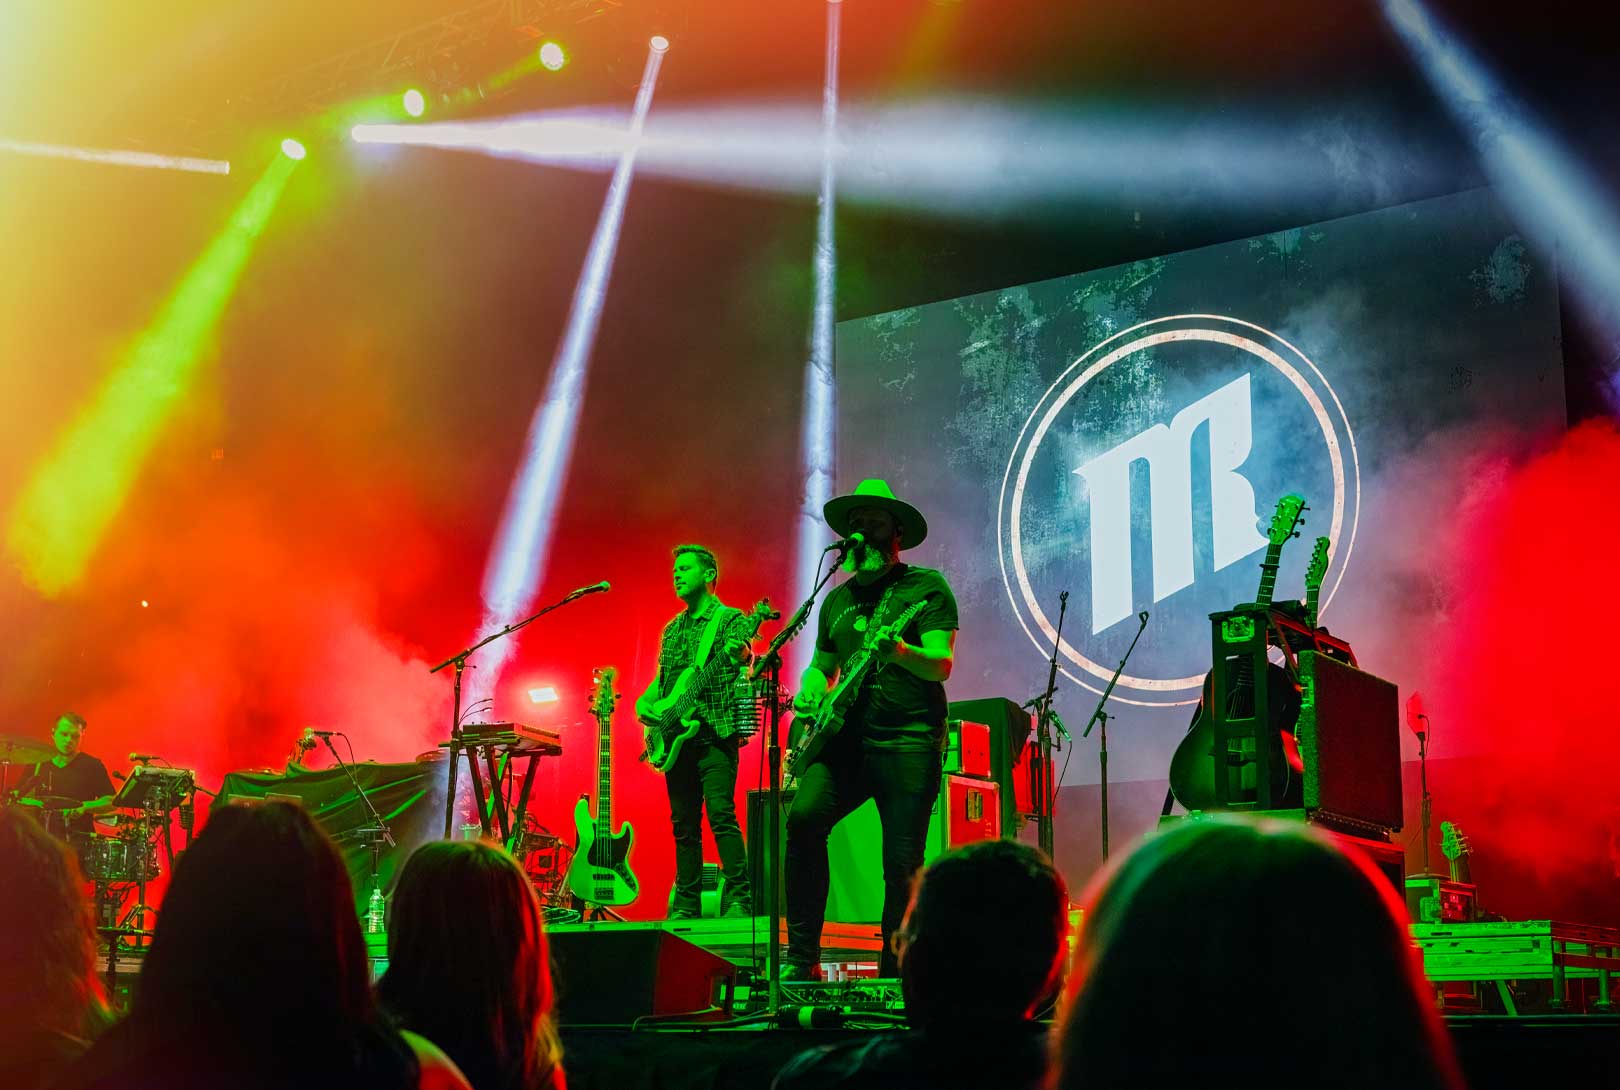 Michael Ray with his band playing live on stage with red, yellow, white, and green stage lights